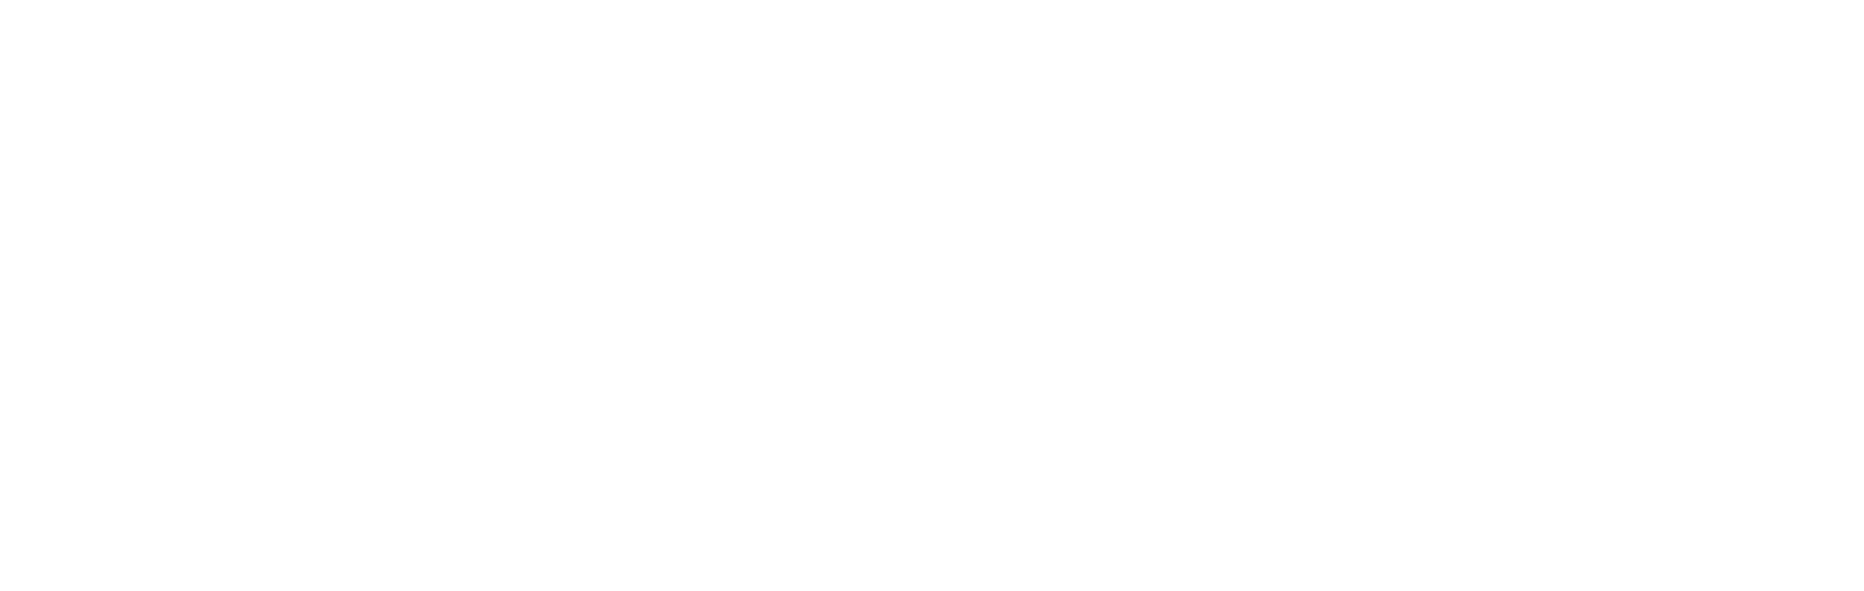 Compass brand logo, experts in real estate